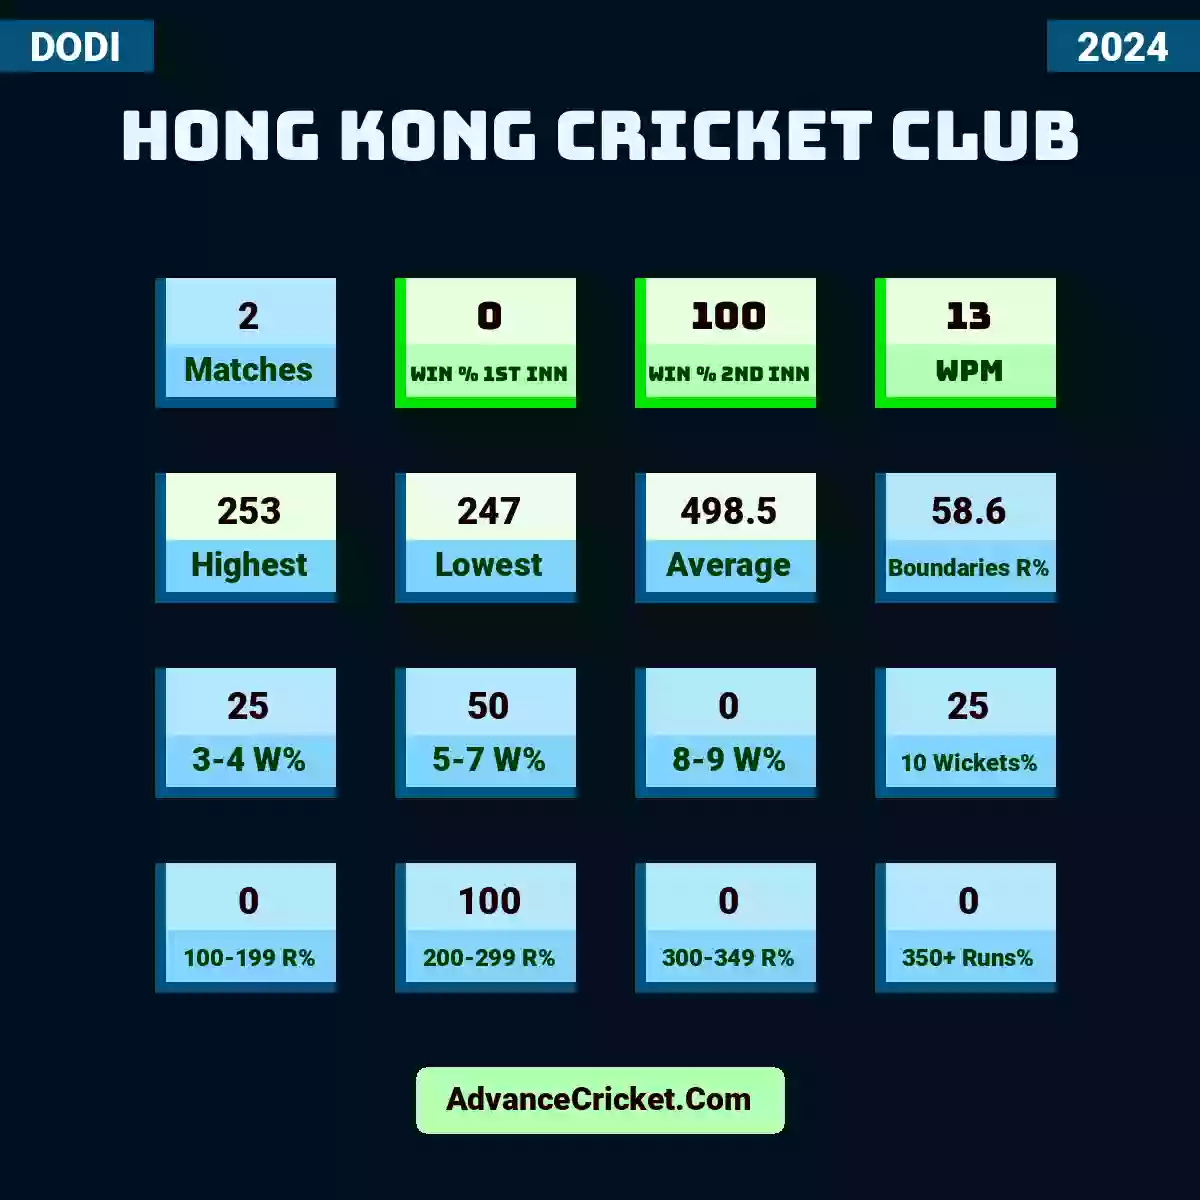 Image showing Hong Kong Cricket Club with Matches: 2, Win % 1st Inn: 0, Win % 2nd Inn: 100, WPM: 13, Highest: 253, Lowest: 247, Average: 498.5, Boundaries R%: 58.6, 3-4 W%: 25, 5-7 W%: 50, 8-9 W%: 0, 10 Wickets%: 25, 100-199 R%: 0, 200-299 R%: 100, 300-349 R%: 0, 350+ Runs%: 0.